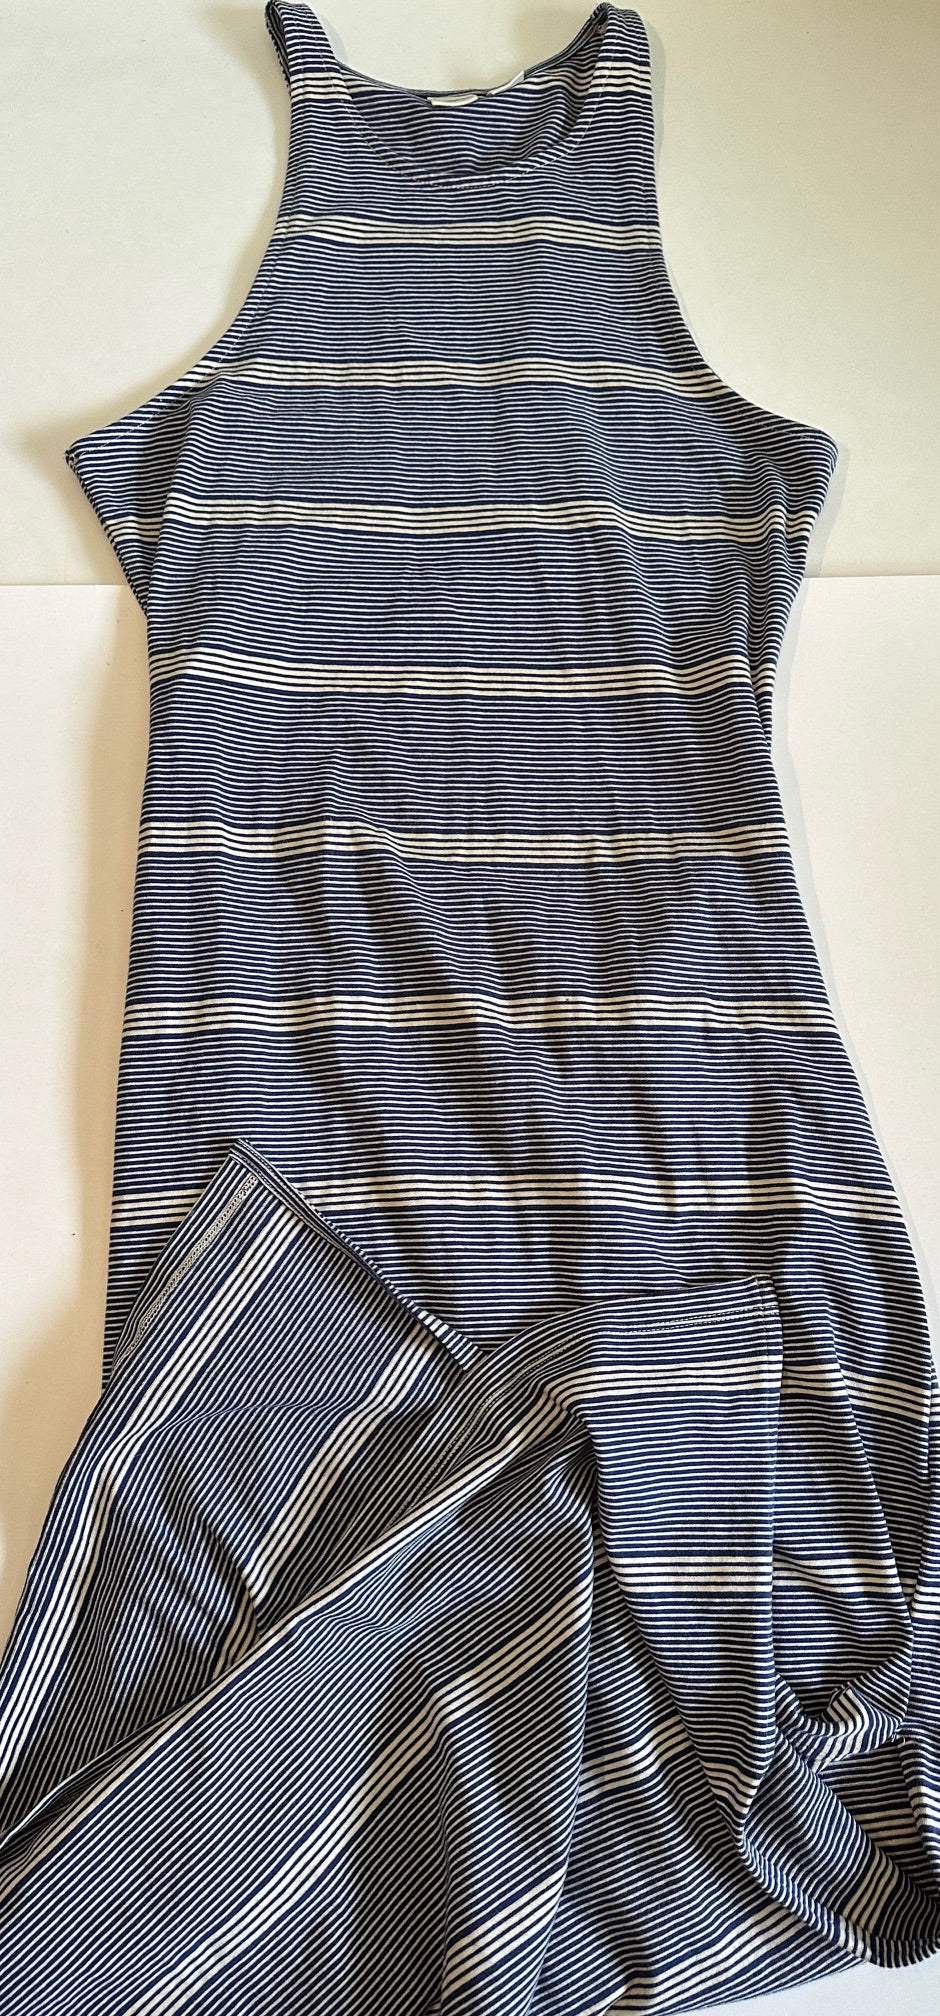 *Adult* Roxy, Blue Striped Long Dress with Cut-Out Back - Size Large